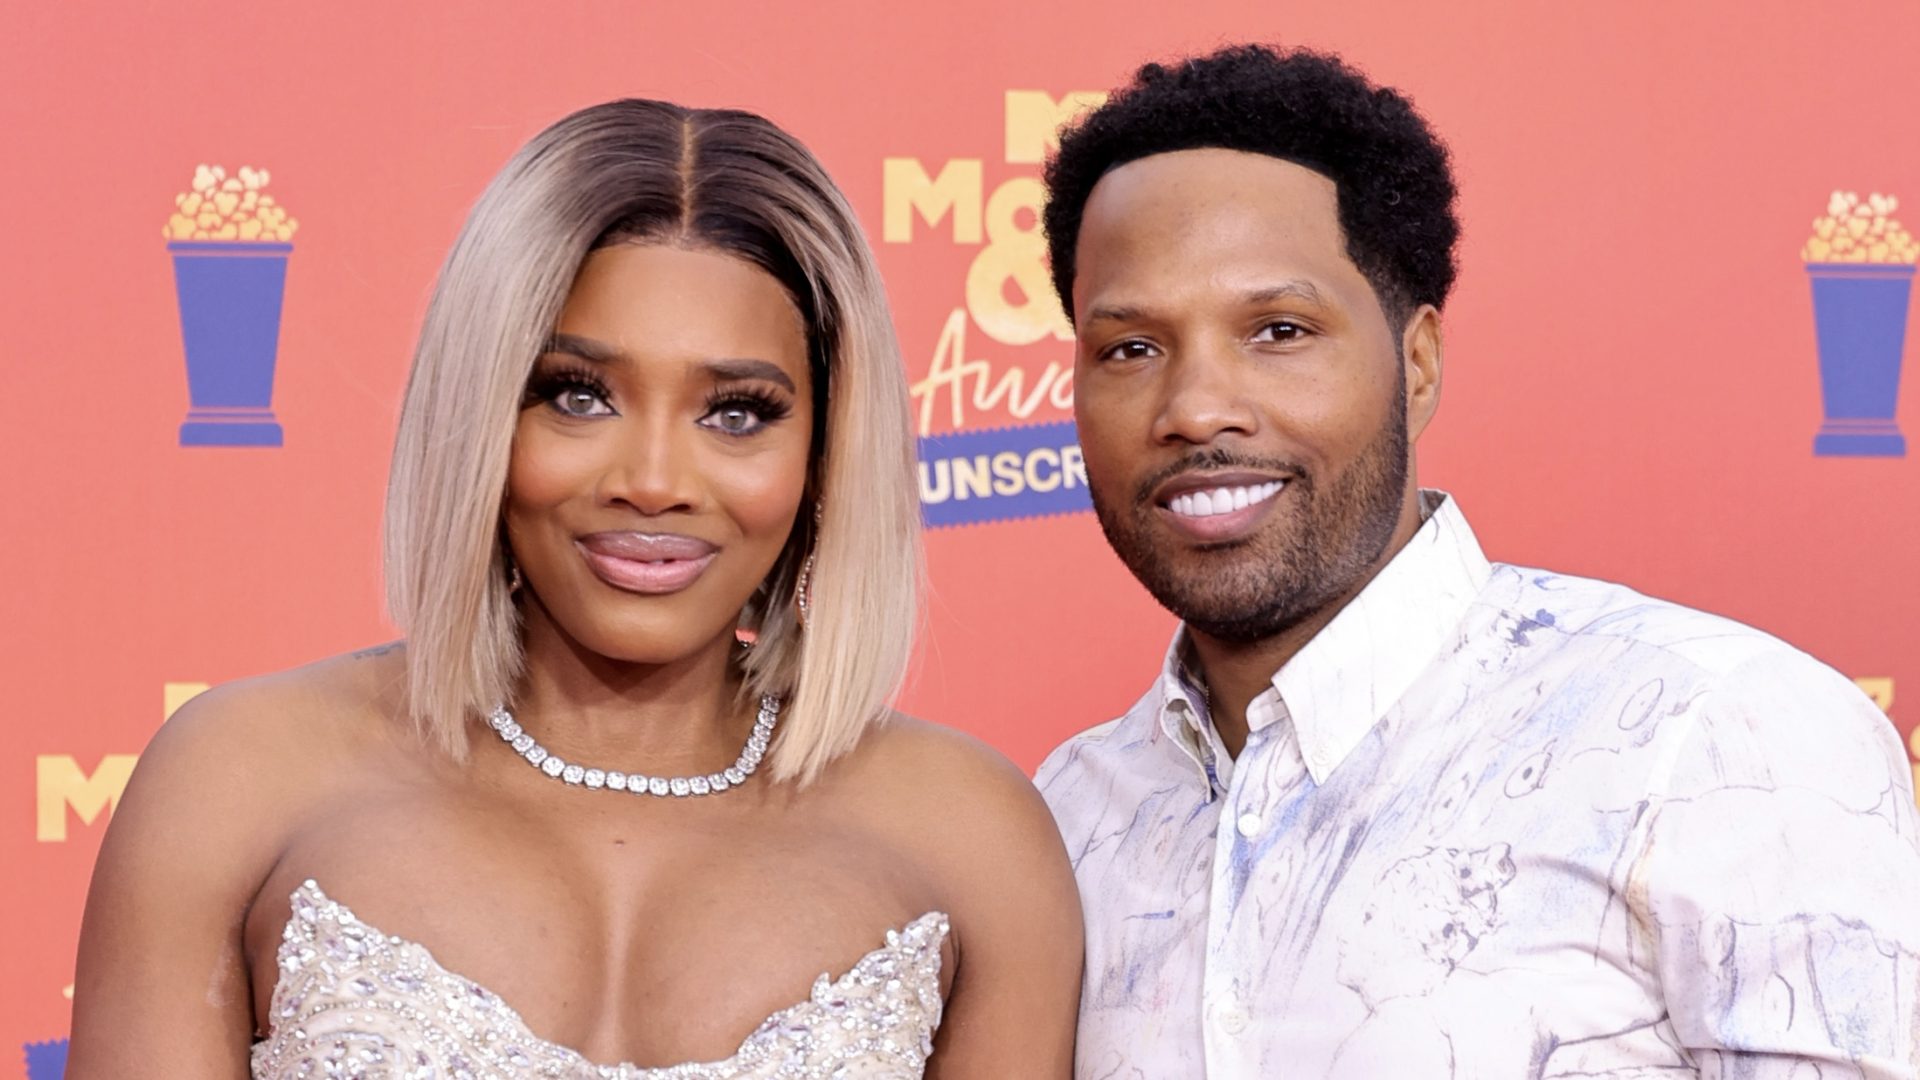 Oop! Mendeecees Seemingly Reacts After Being Accused Of Cheating On Yandy Smith (Videos)